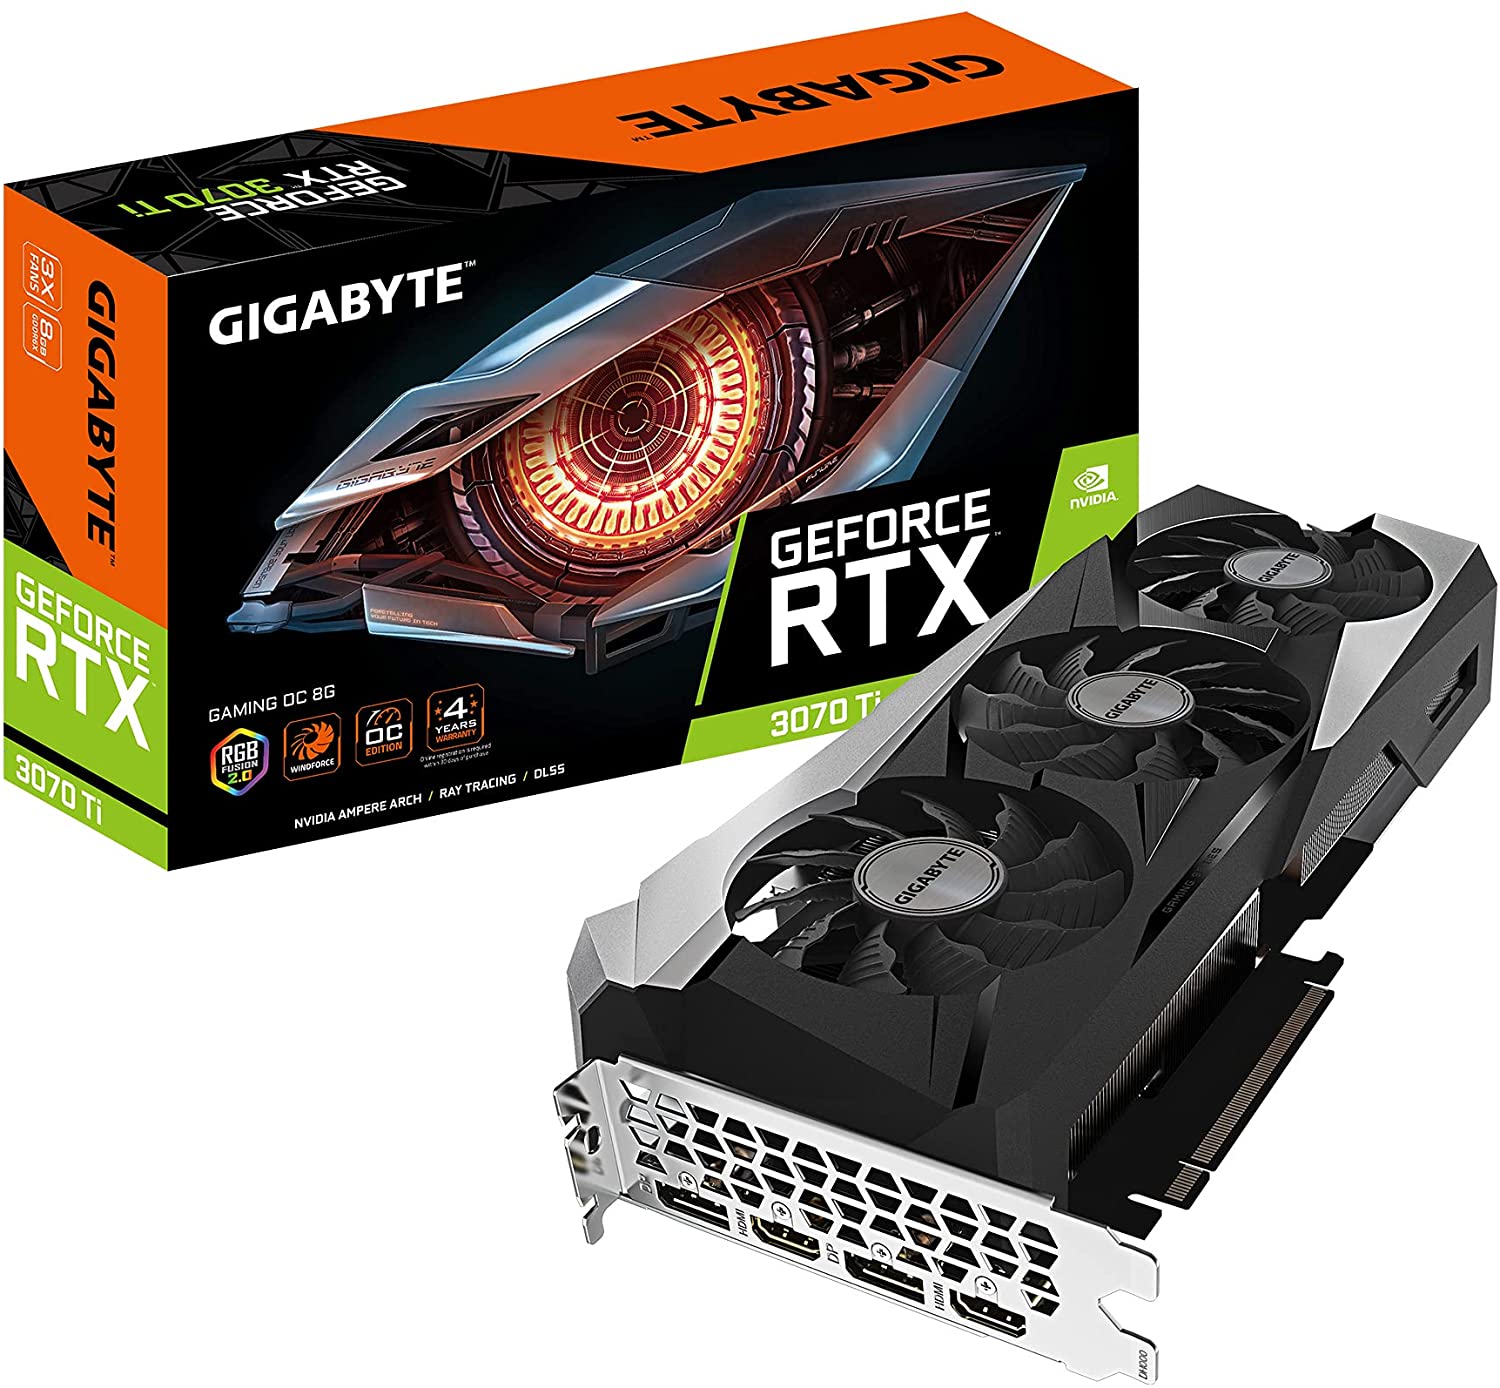 GIGABYTE GeForce RTX 3070 Ti OC 8G Graphics Card w/ WINDFORCE 3X Cooling System $700 + Free Shipping